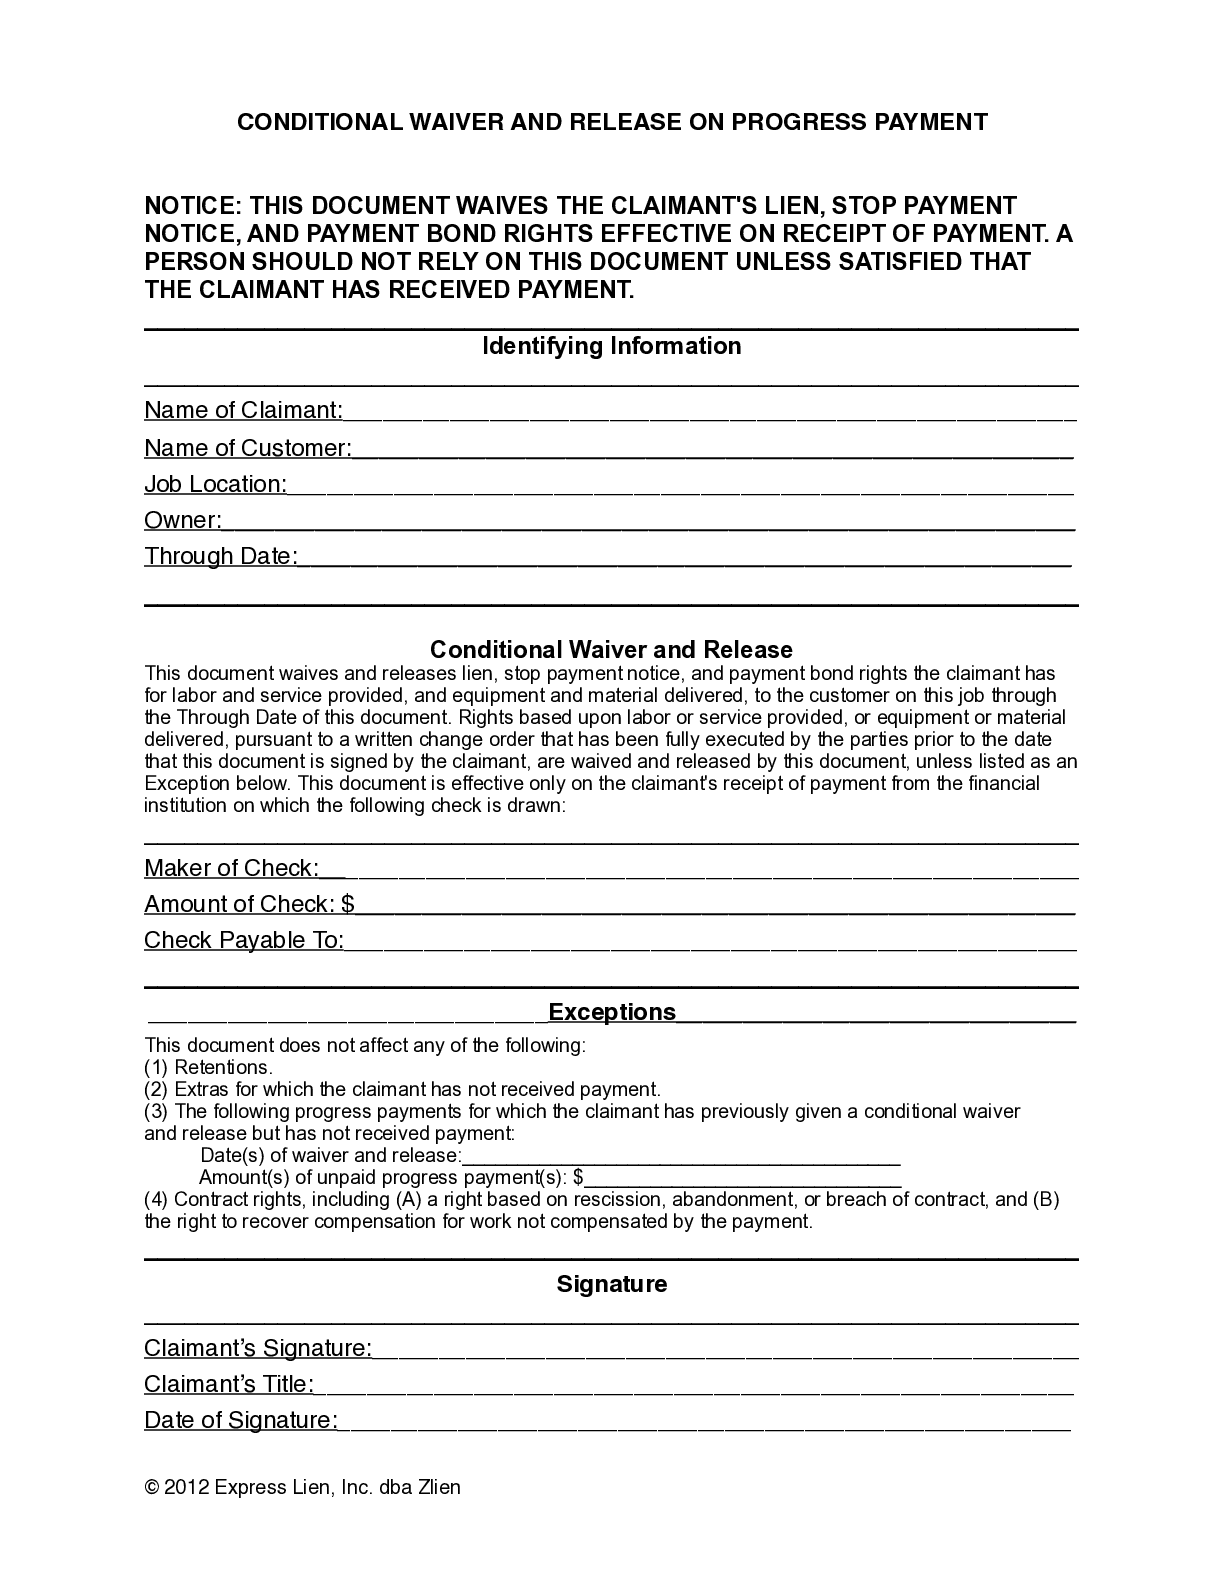 Washington Partial Conditional Lien Waiver Form - free from